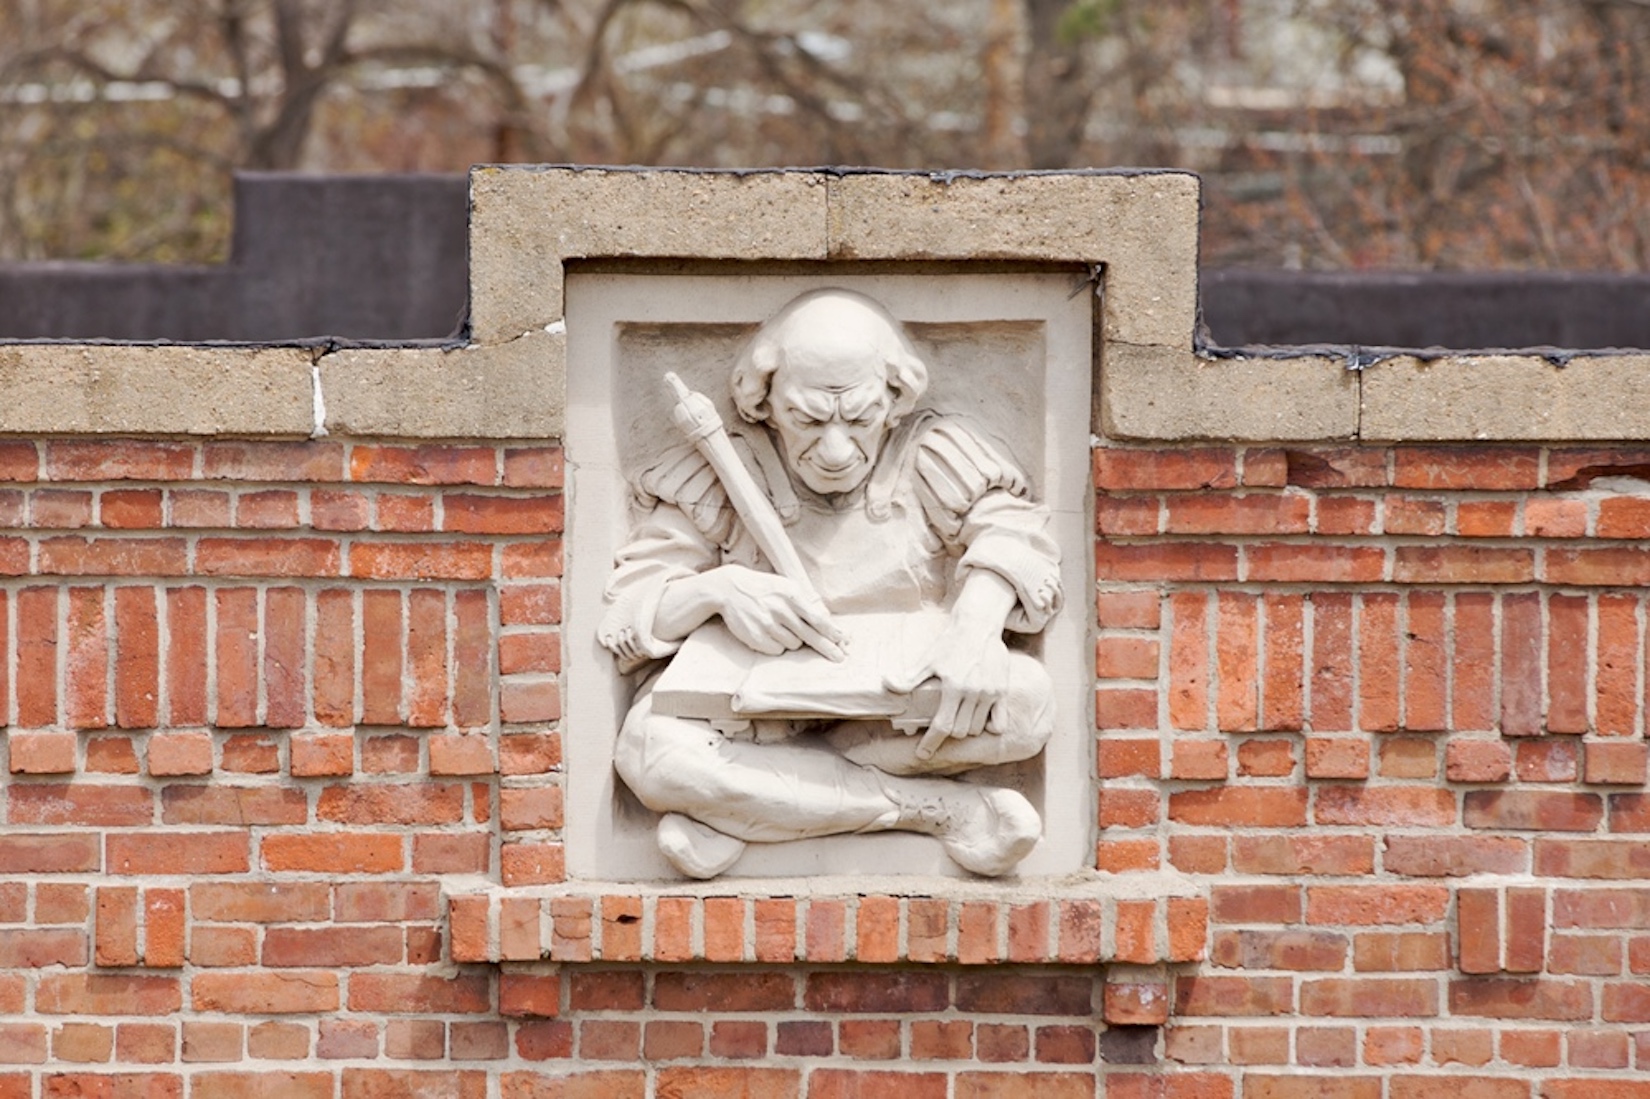 The Sanborn Map building’s traditional façade, adorned with unique, century old relief sculptures of ancient mapmakers, serves as a visual reminder of its impressive 110 year history